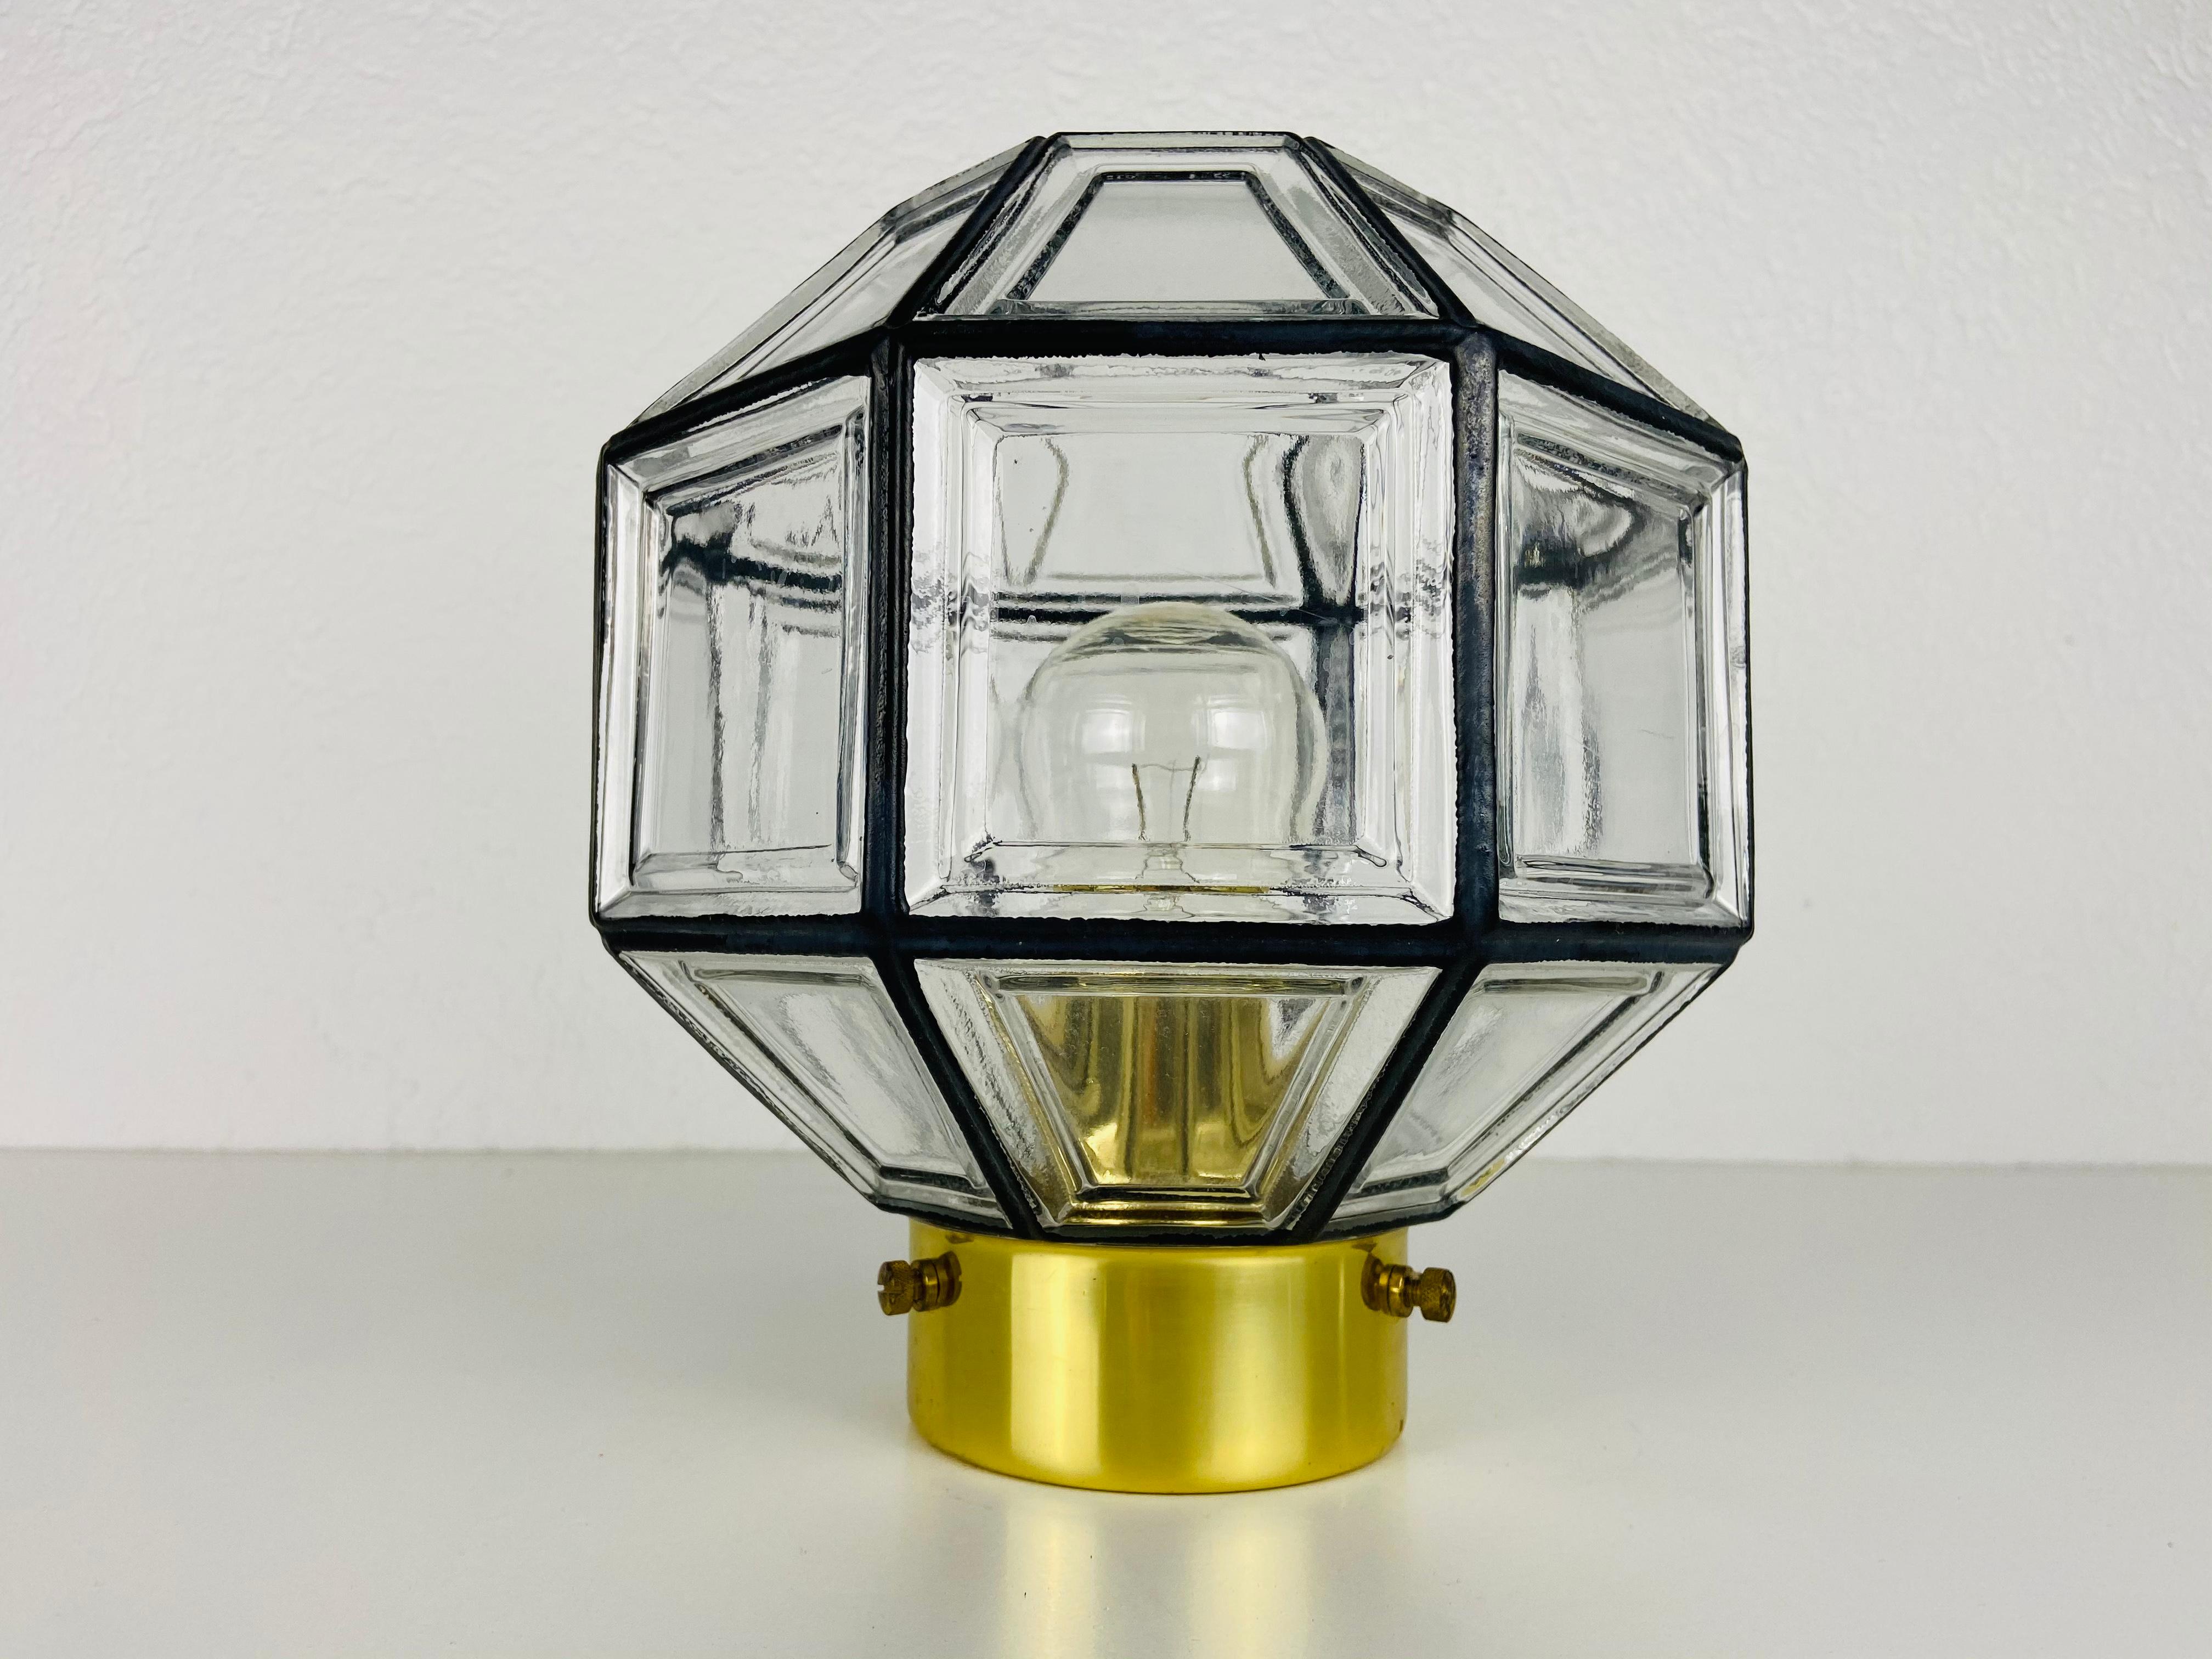 A Mid-Century Modern flush mount by Glashütte Limburg made in the 1960s in Germany. It is fascinating with its beautiful shape and bubble glass. The fixture has a very nice Minimalist design.

The light requires one E27 (US E26) light bulb. Works